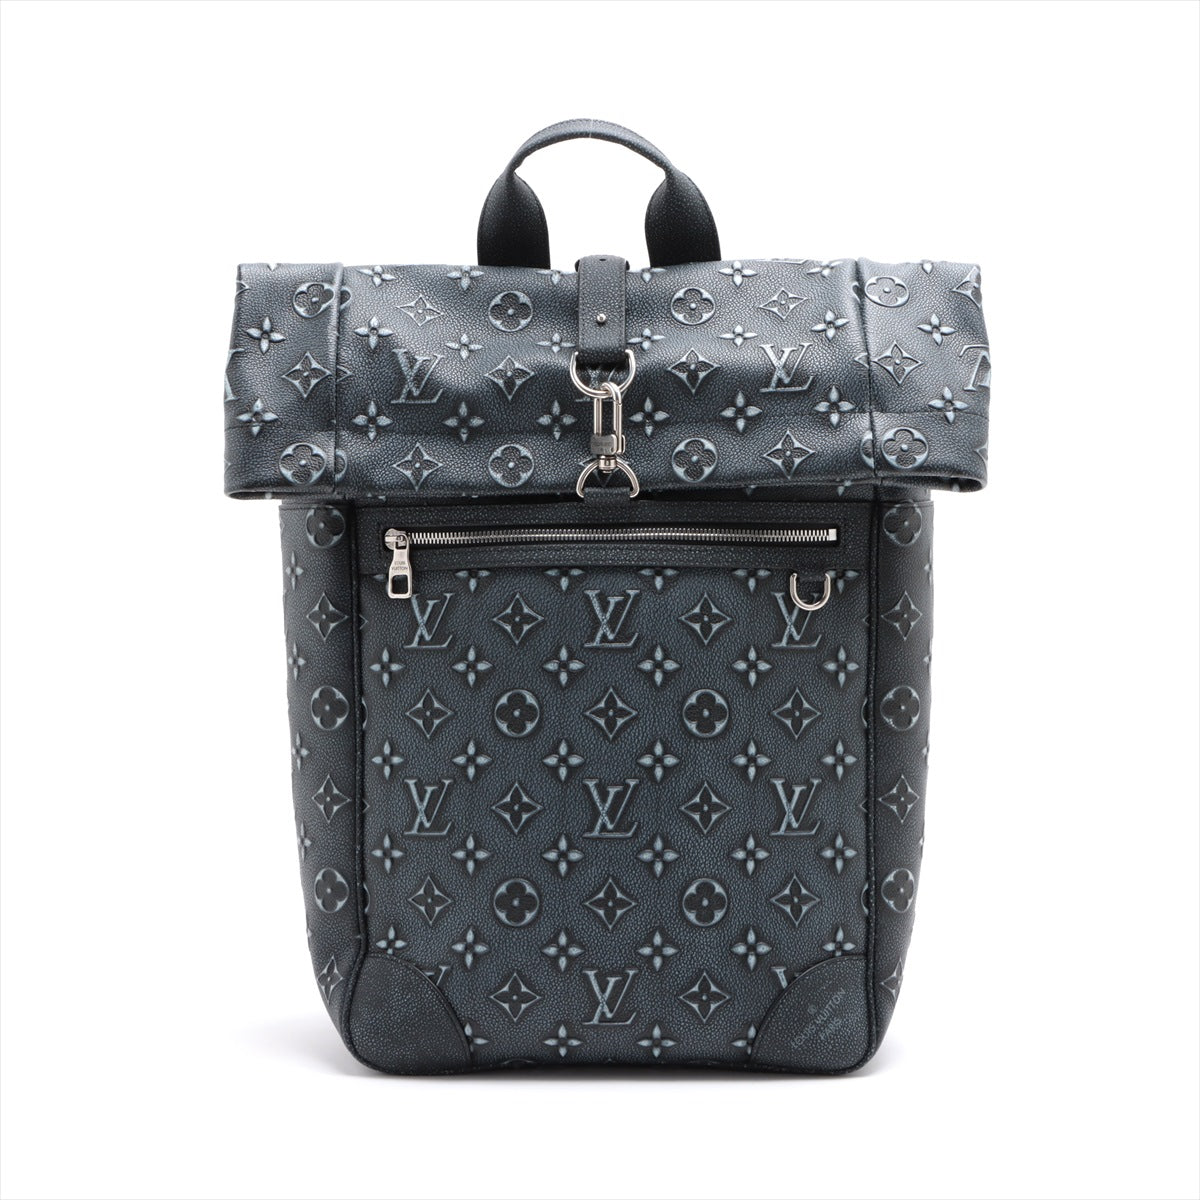 Louis Vuitton Monogram Devos roll top Backpack M21359 There was an RFID response